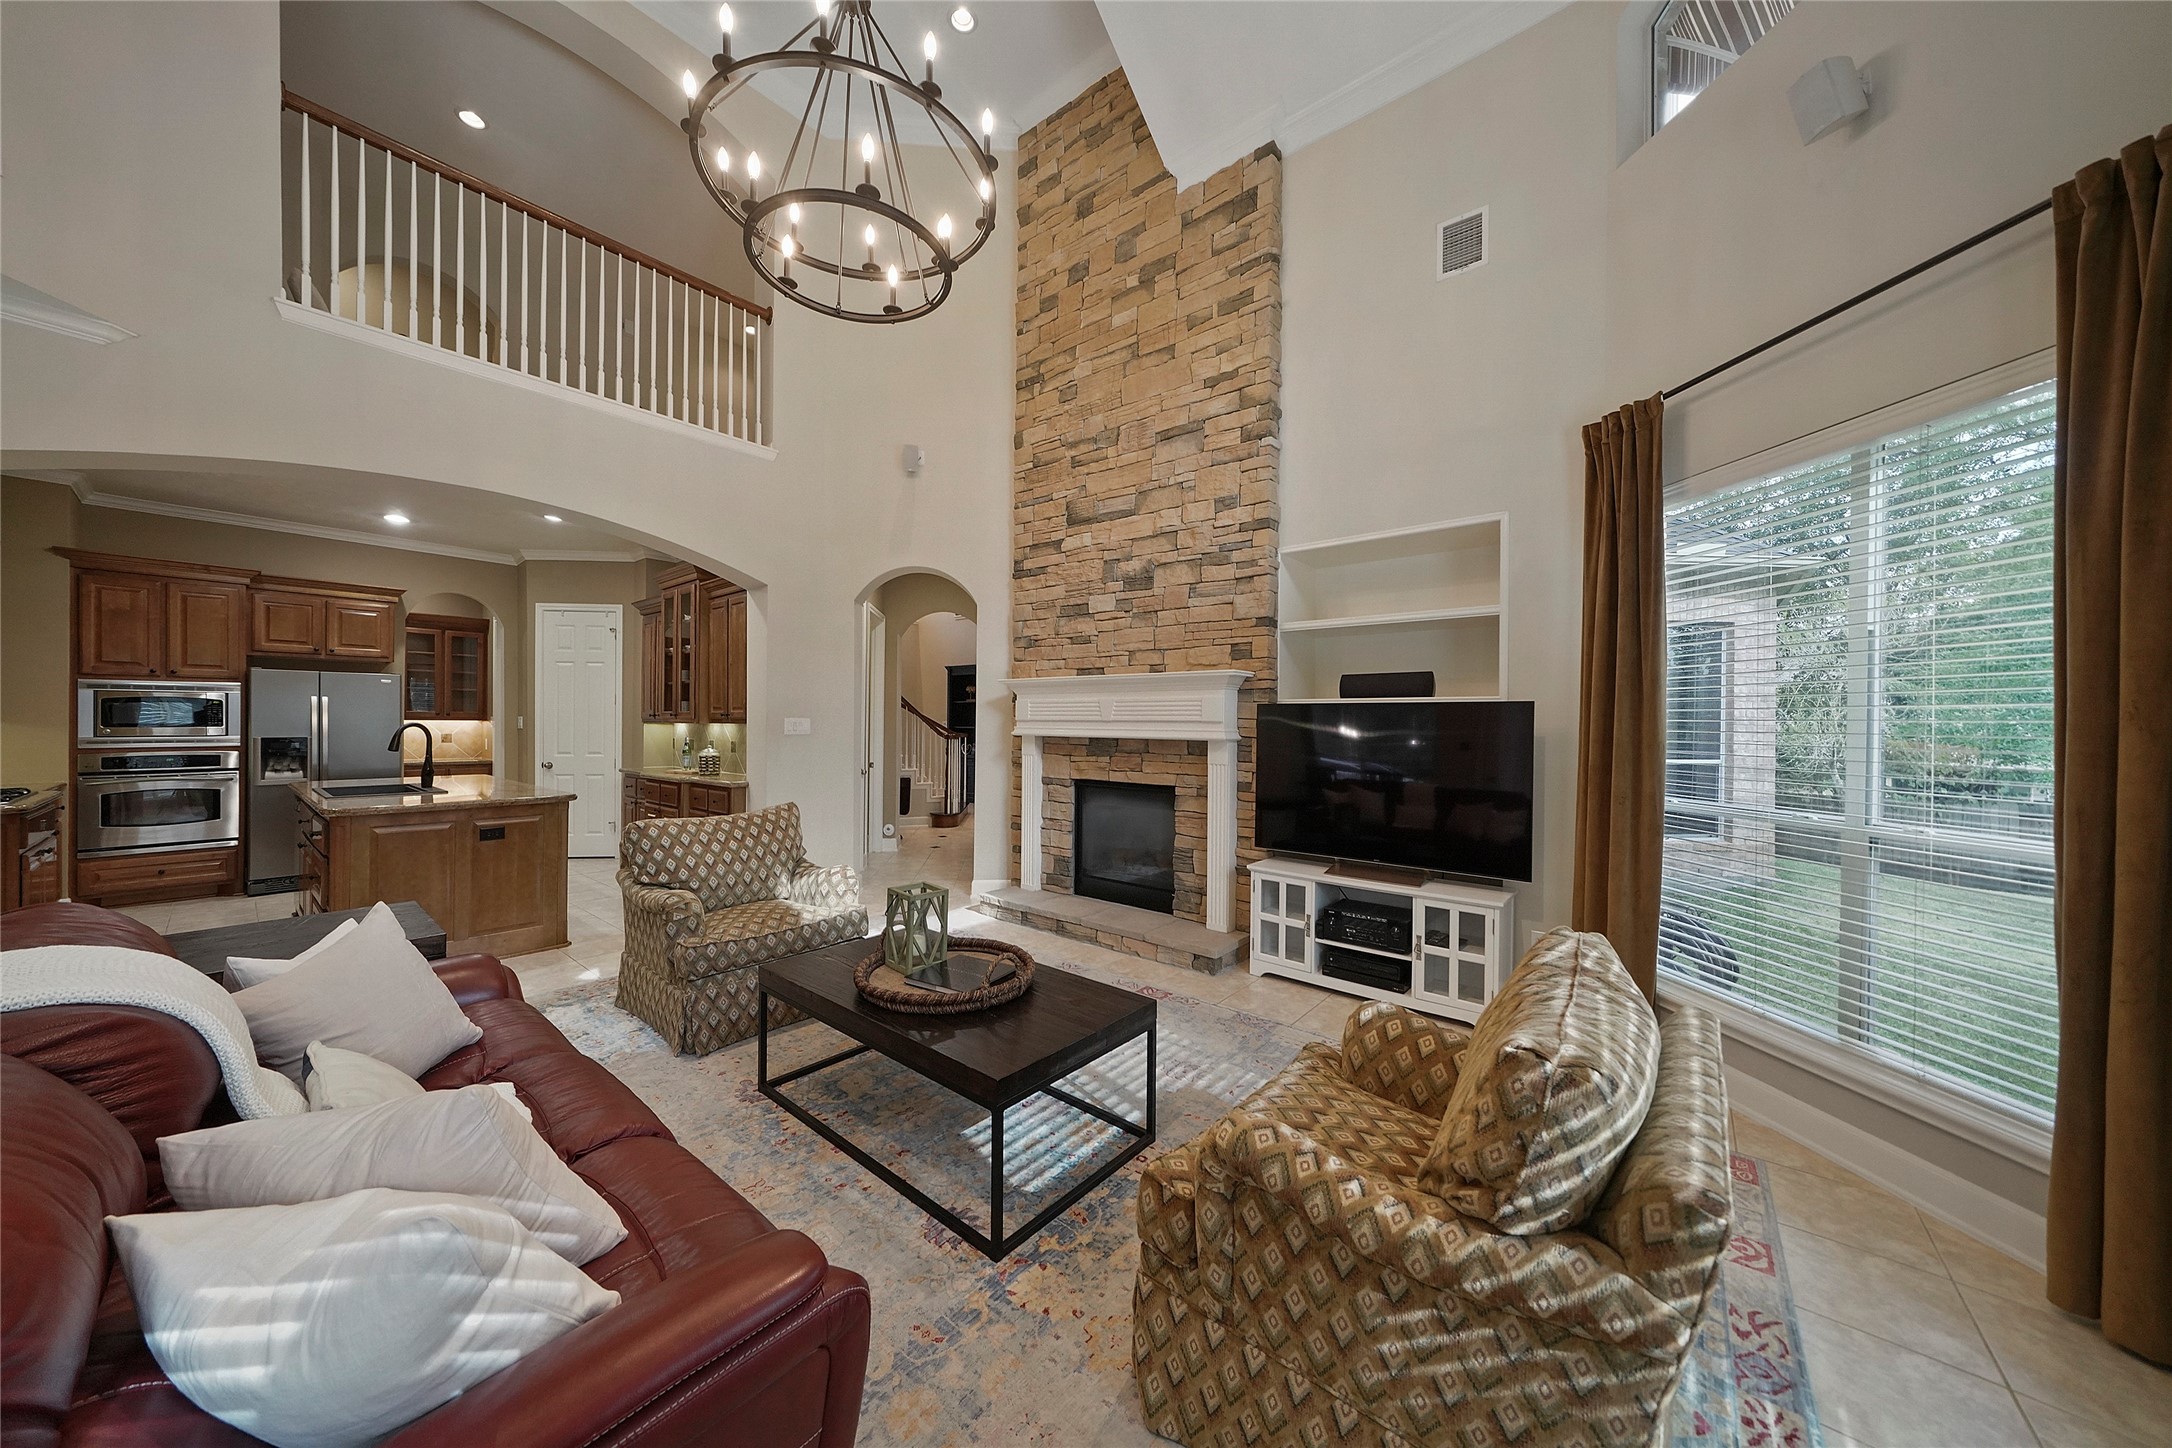 The Formal Living Room overlooks the backyard.  It features a stunning stacked stone, two-sided Fireplace, gorgeous light fixture  and built-in shelving.